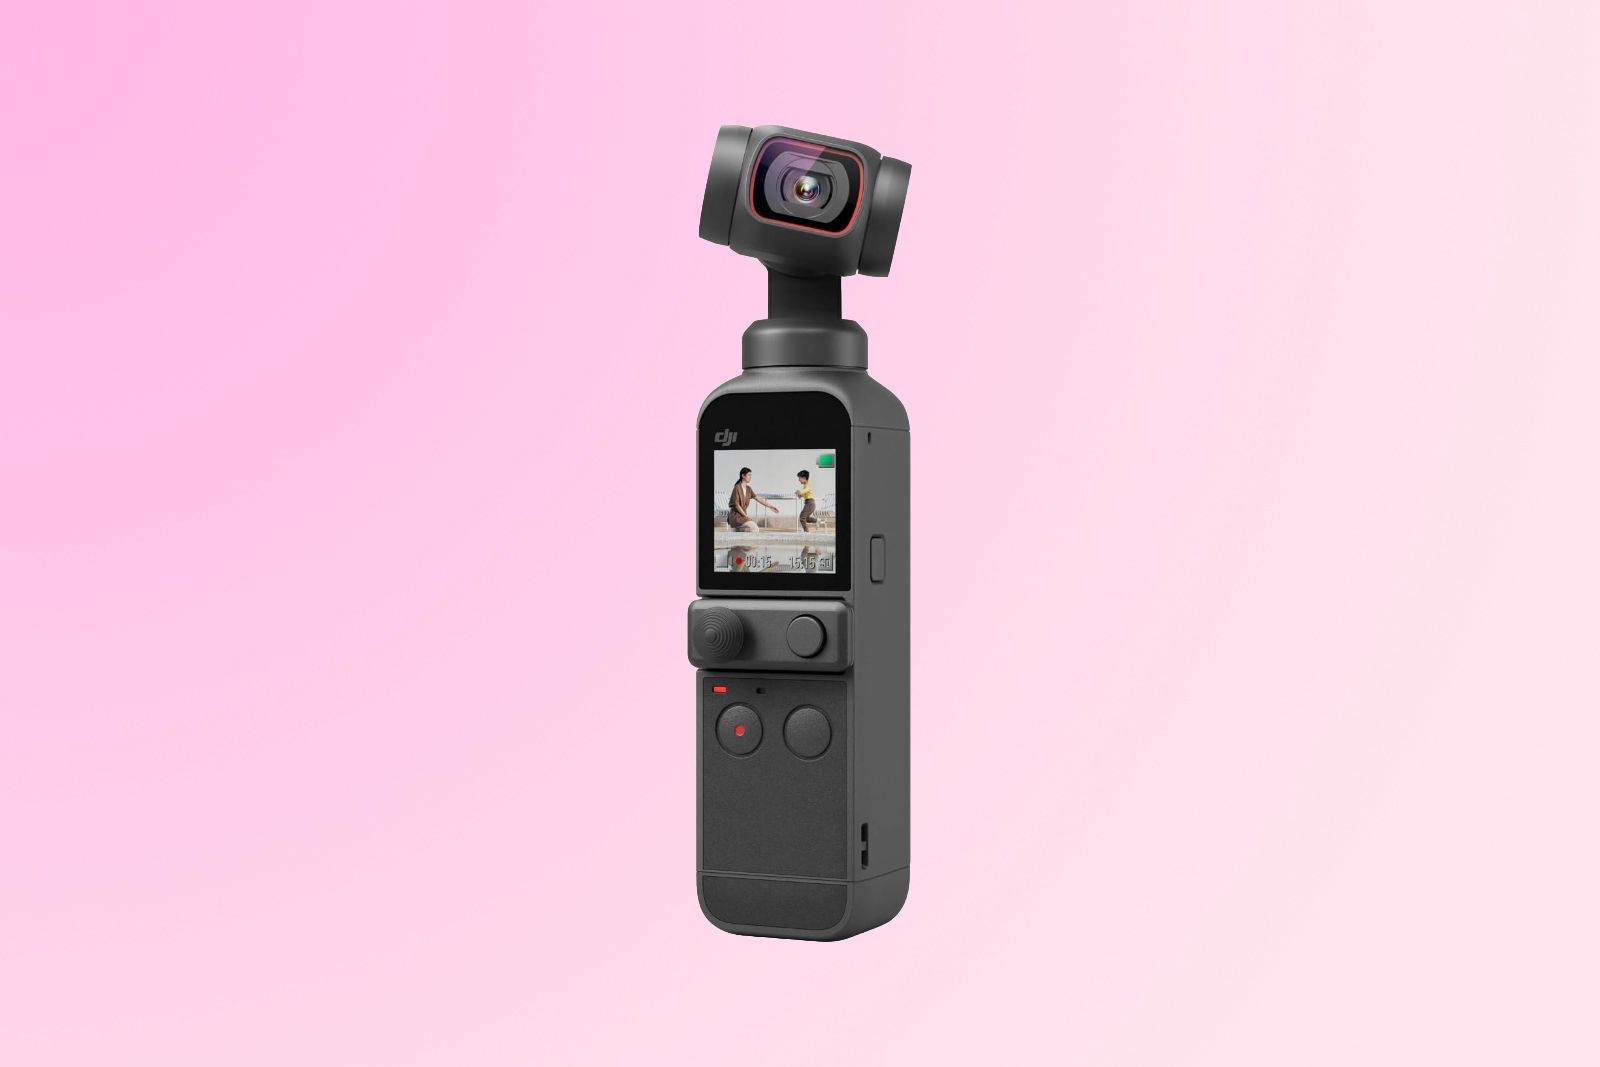 A handle-shaped camera with a small vertical screen, buttons on the side and a rotating camera on the top.